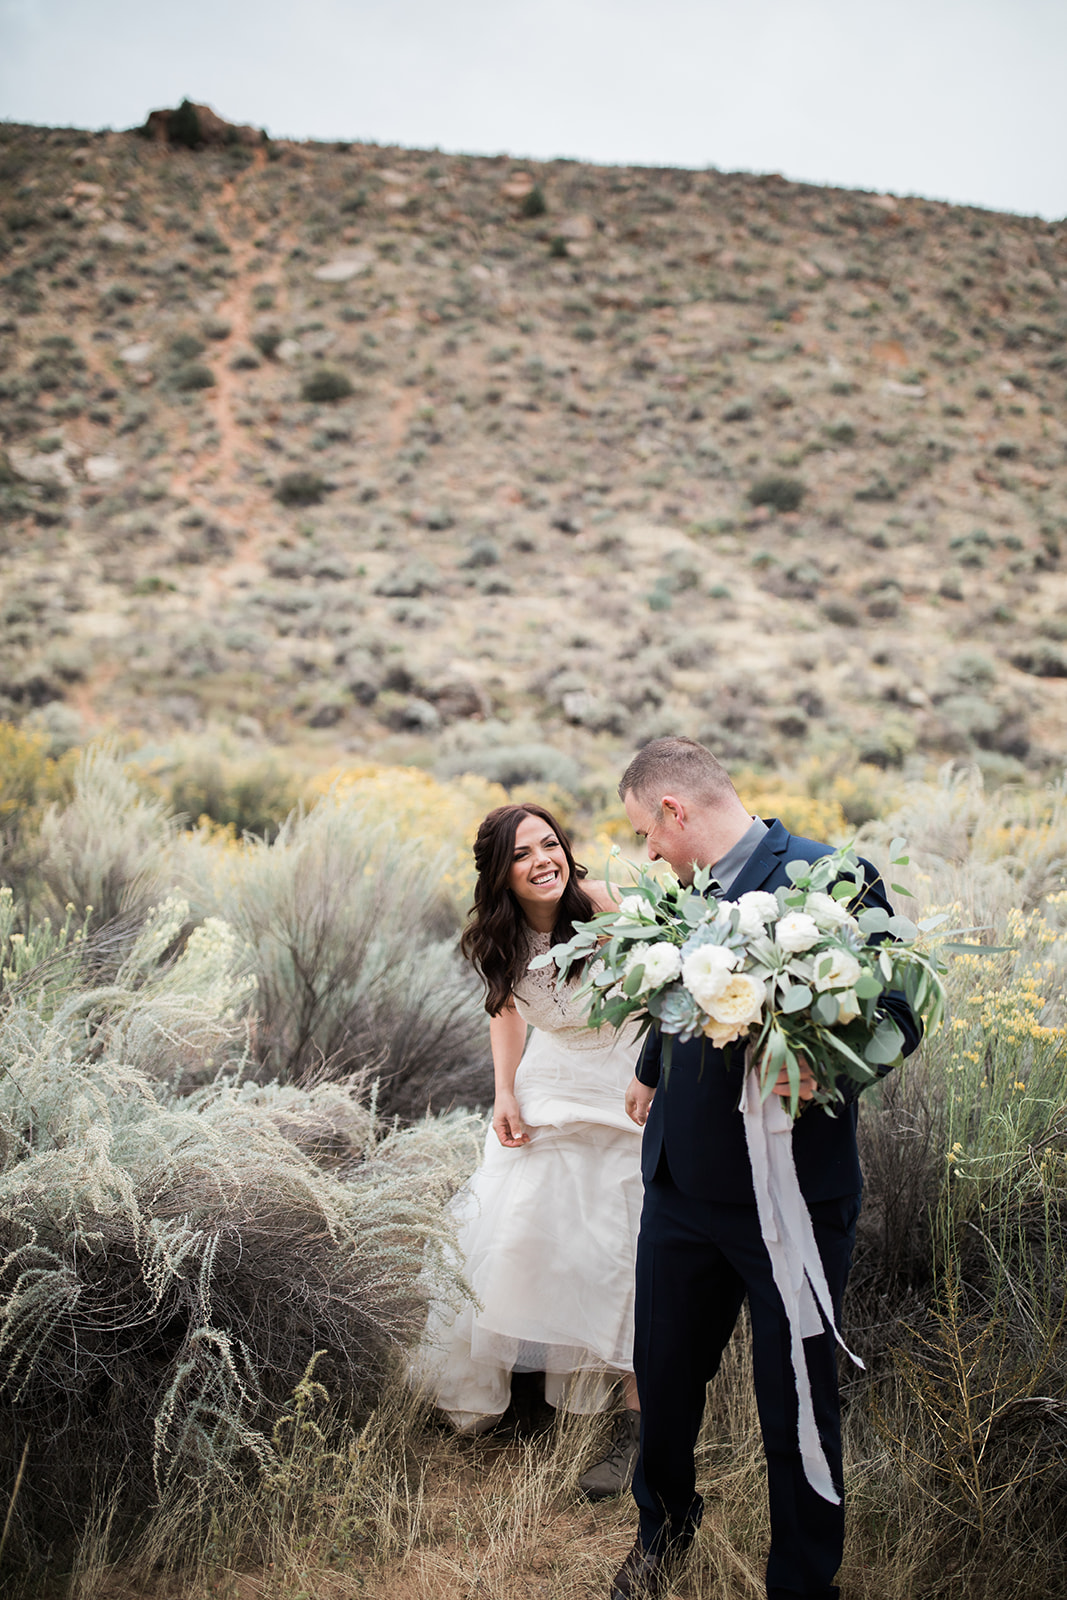 bride and groom portrait in Zion National Park with mountain views